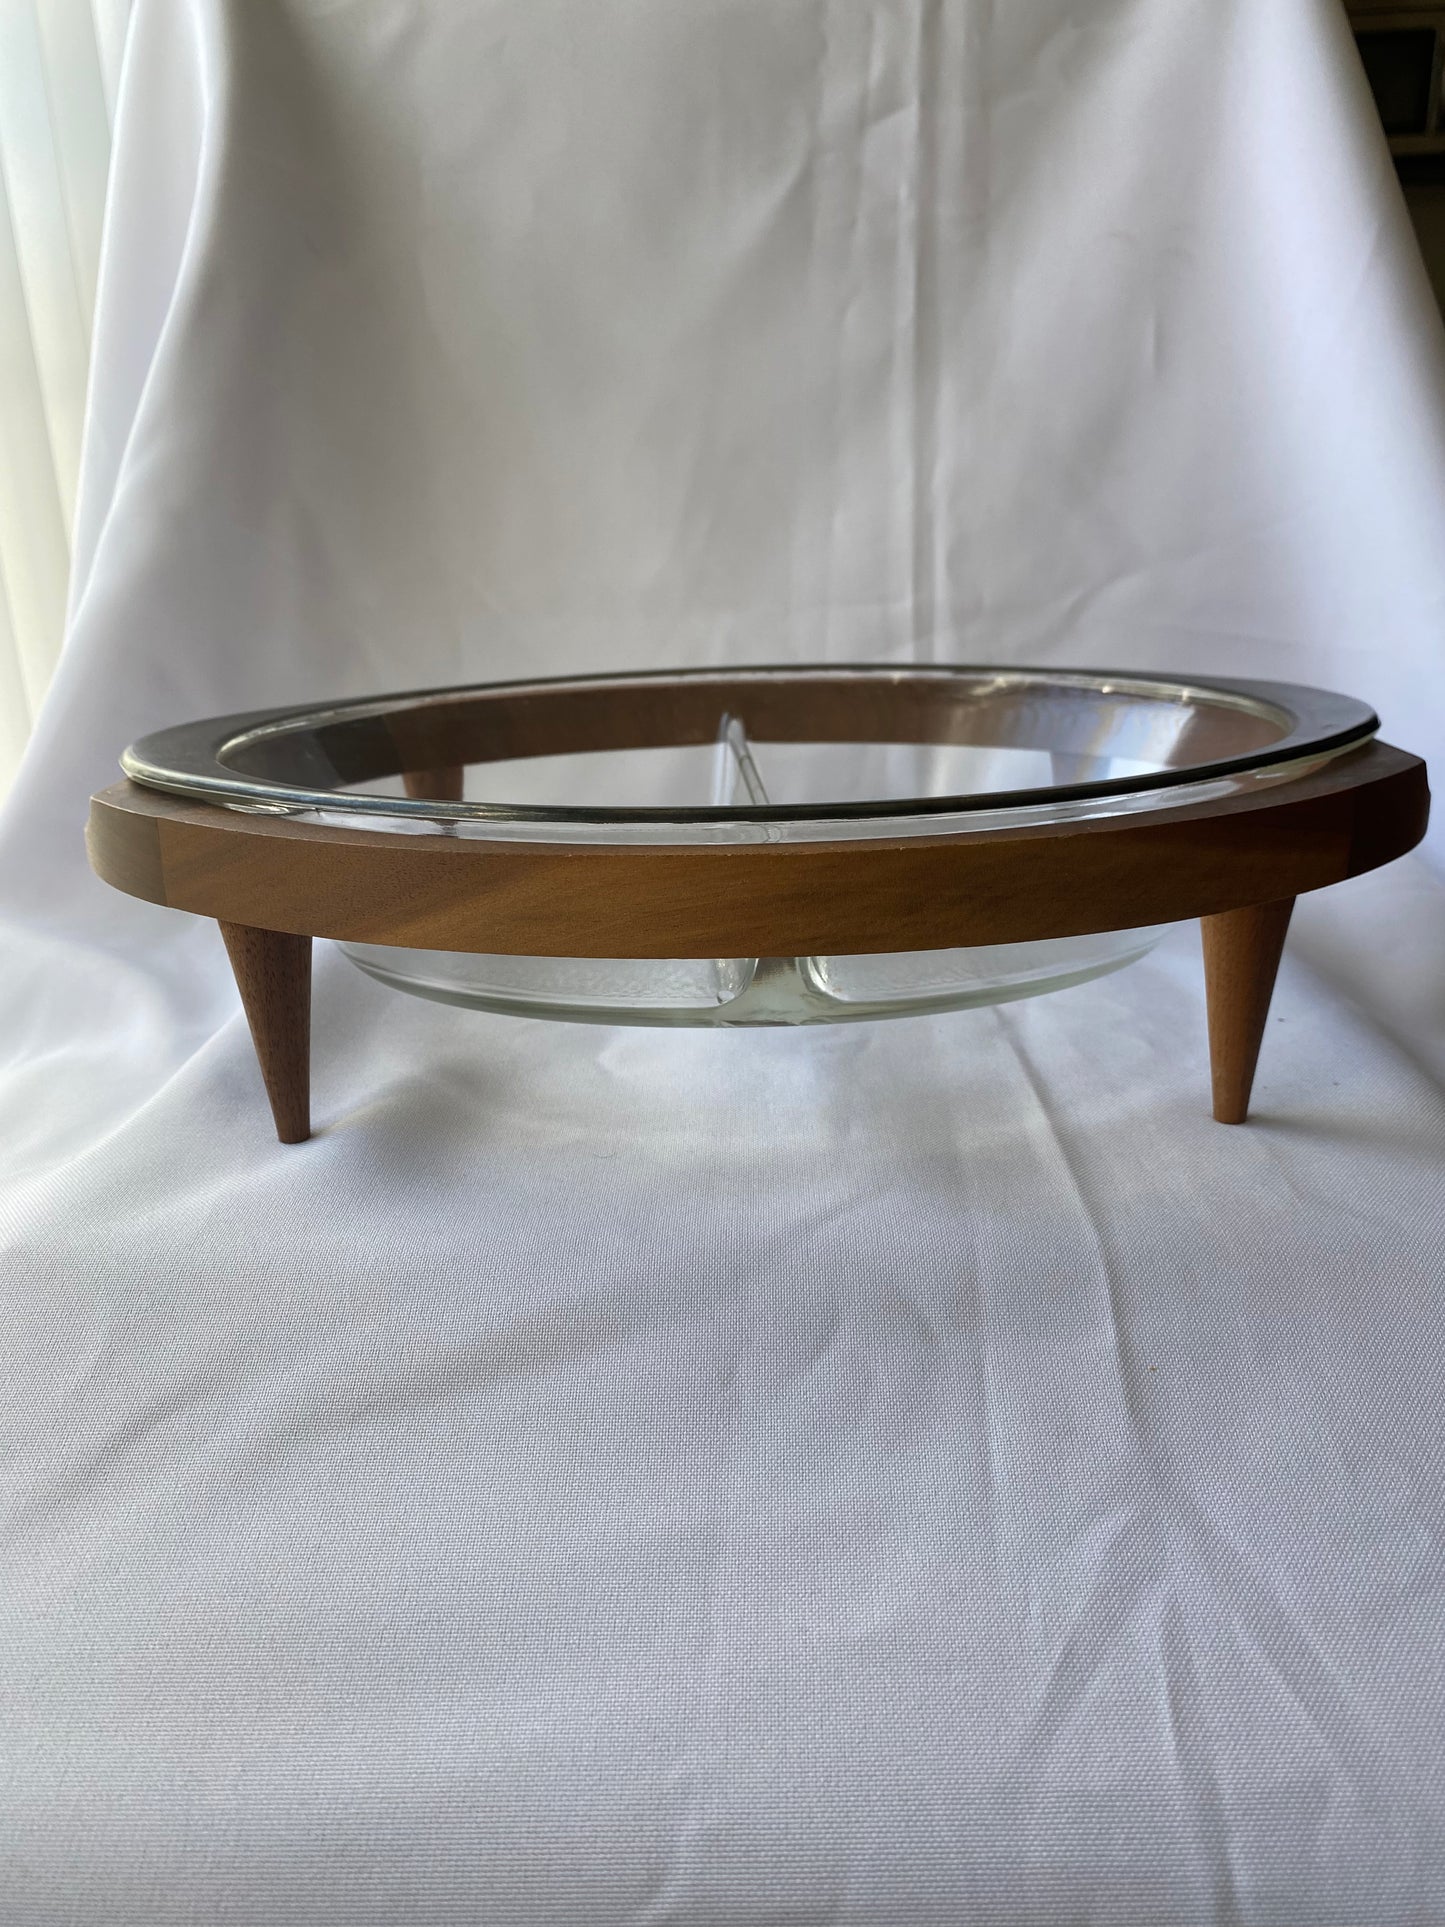 Mid Century Modern Divided Glass Dish with Walnut Stand